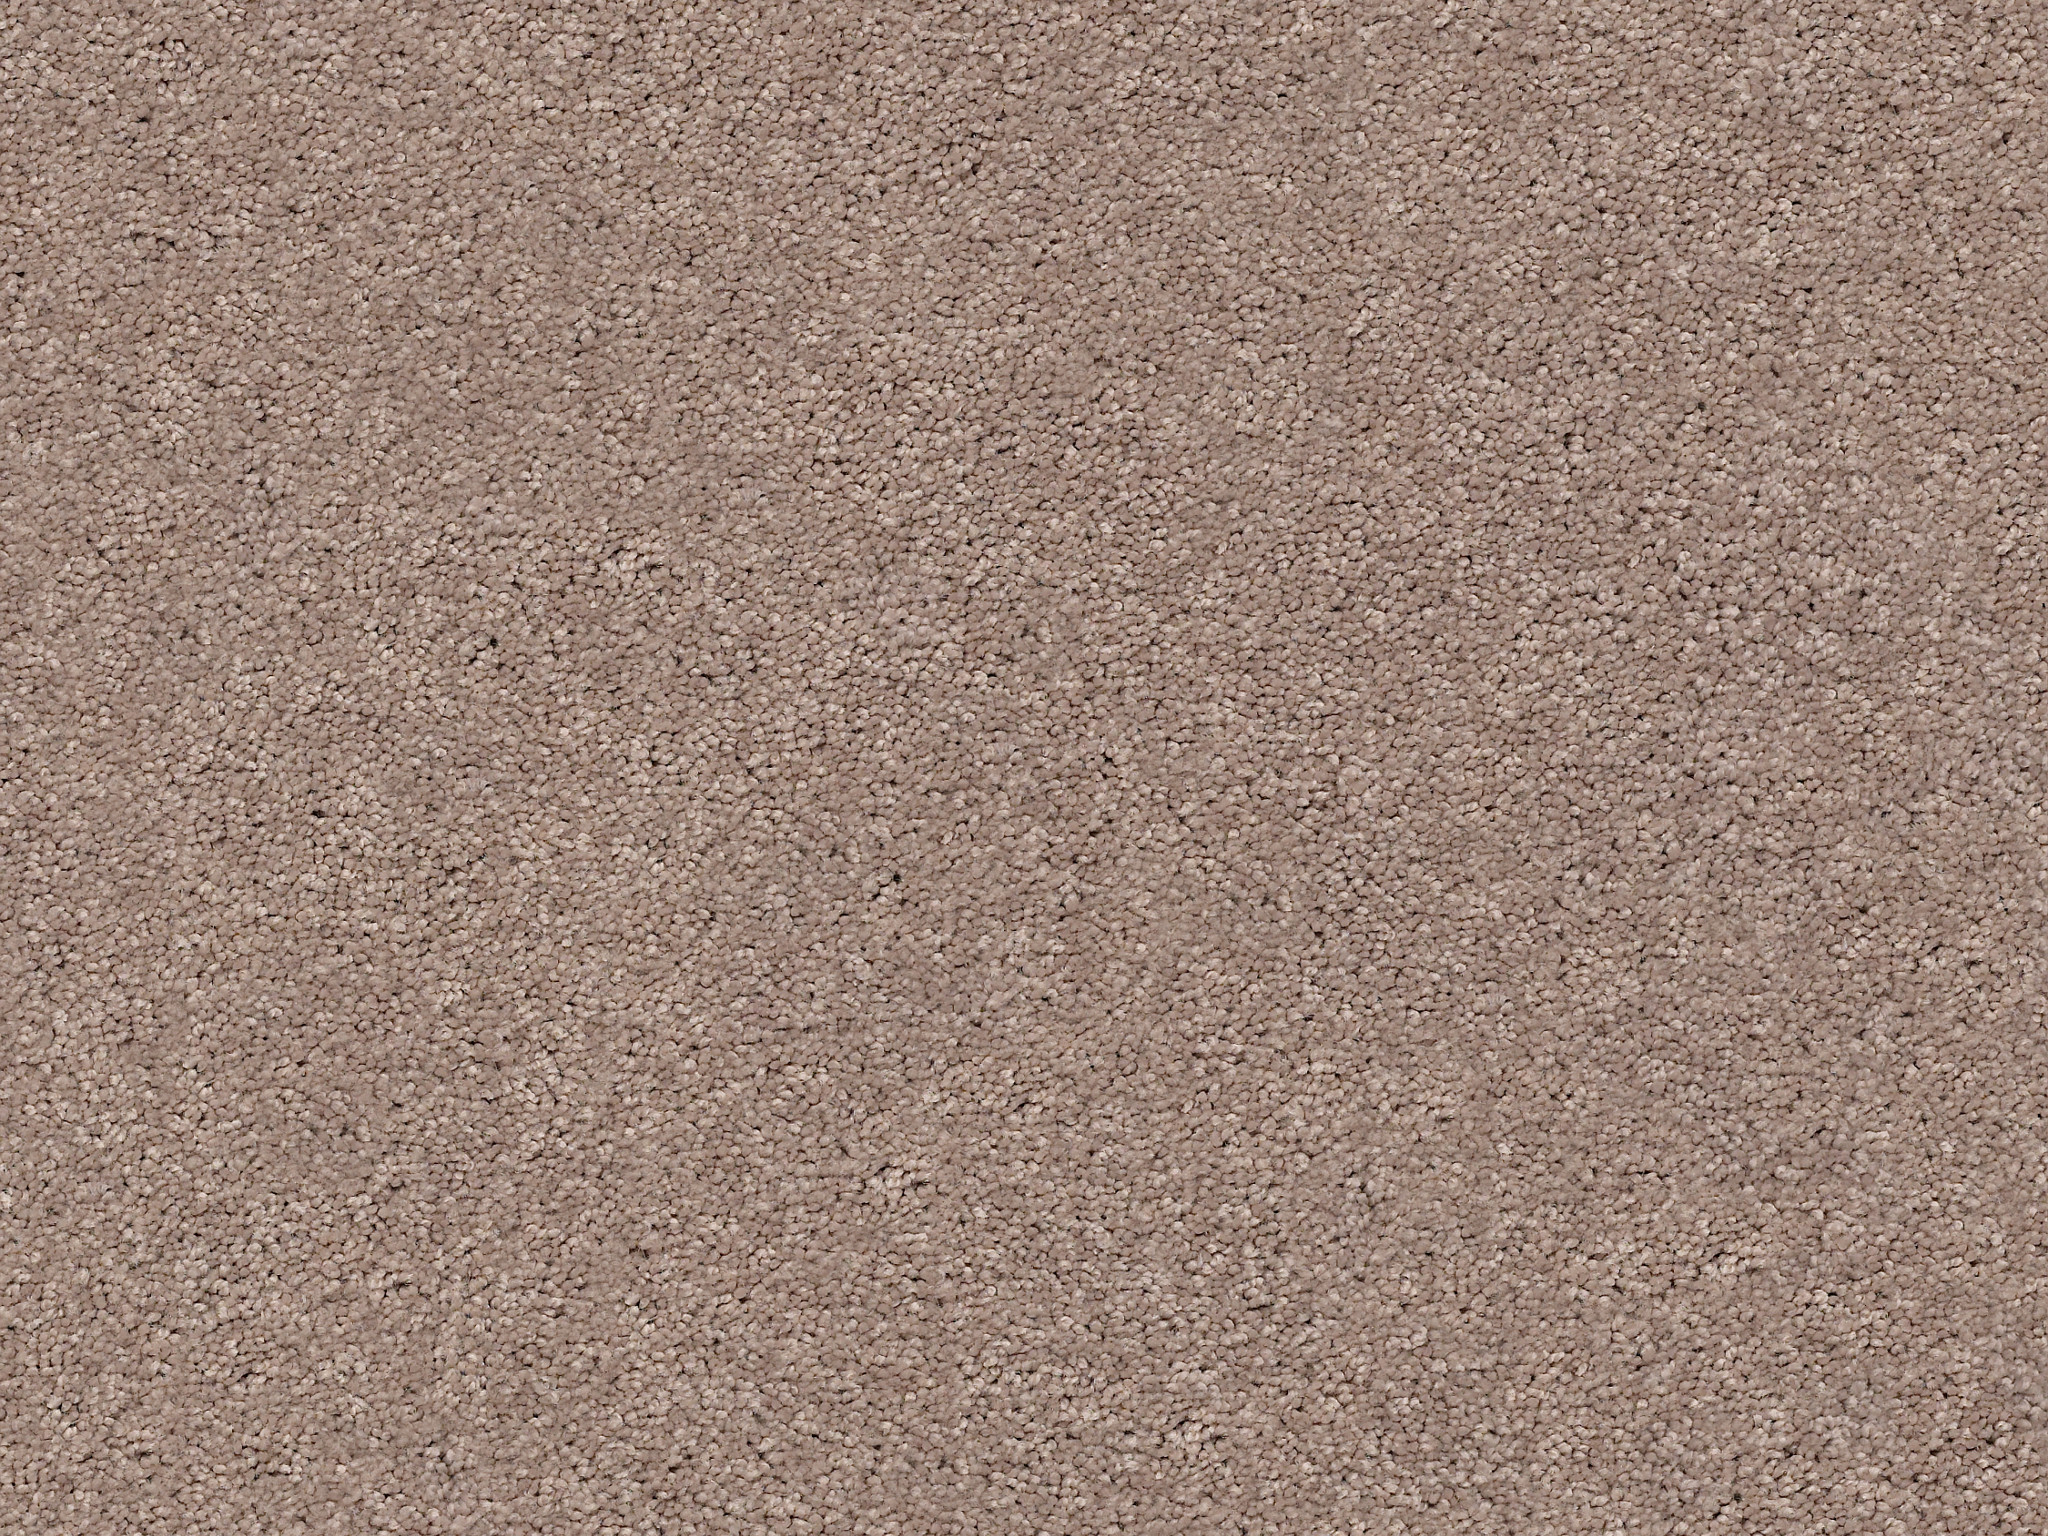 First Act Carpet - Socialite Zoomed Swatch Image